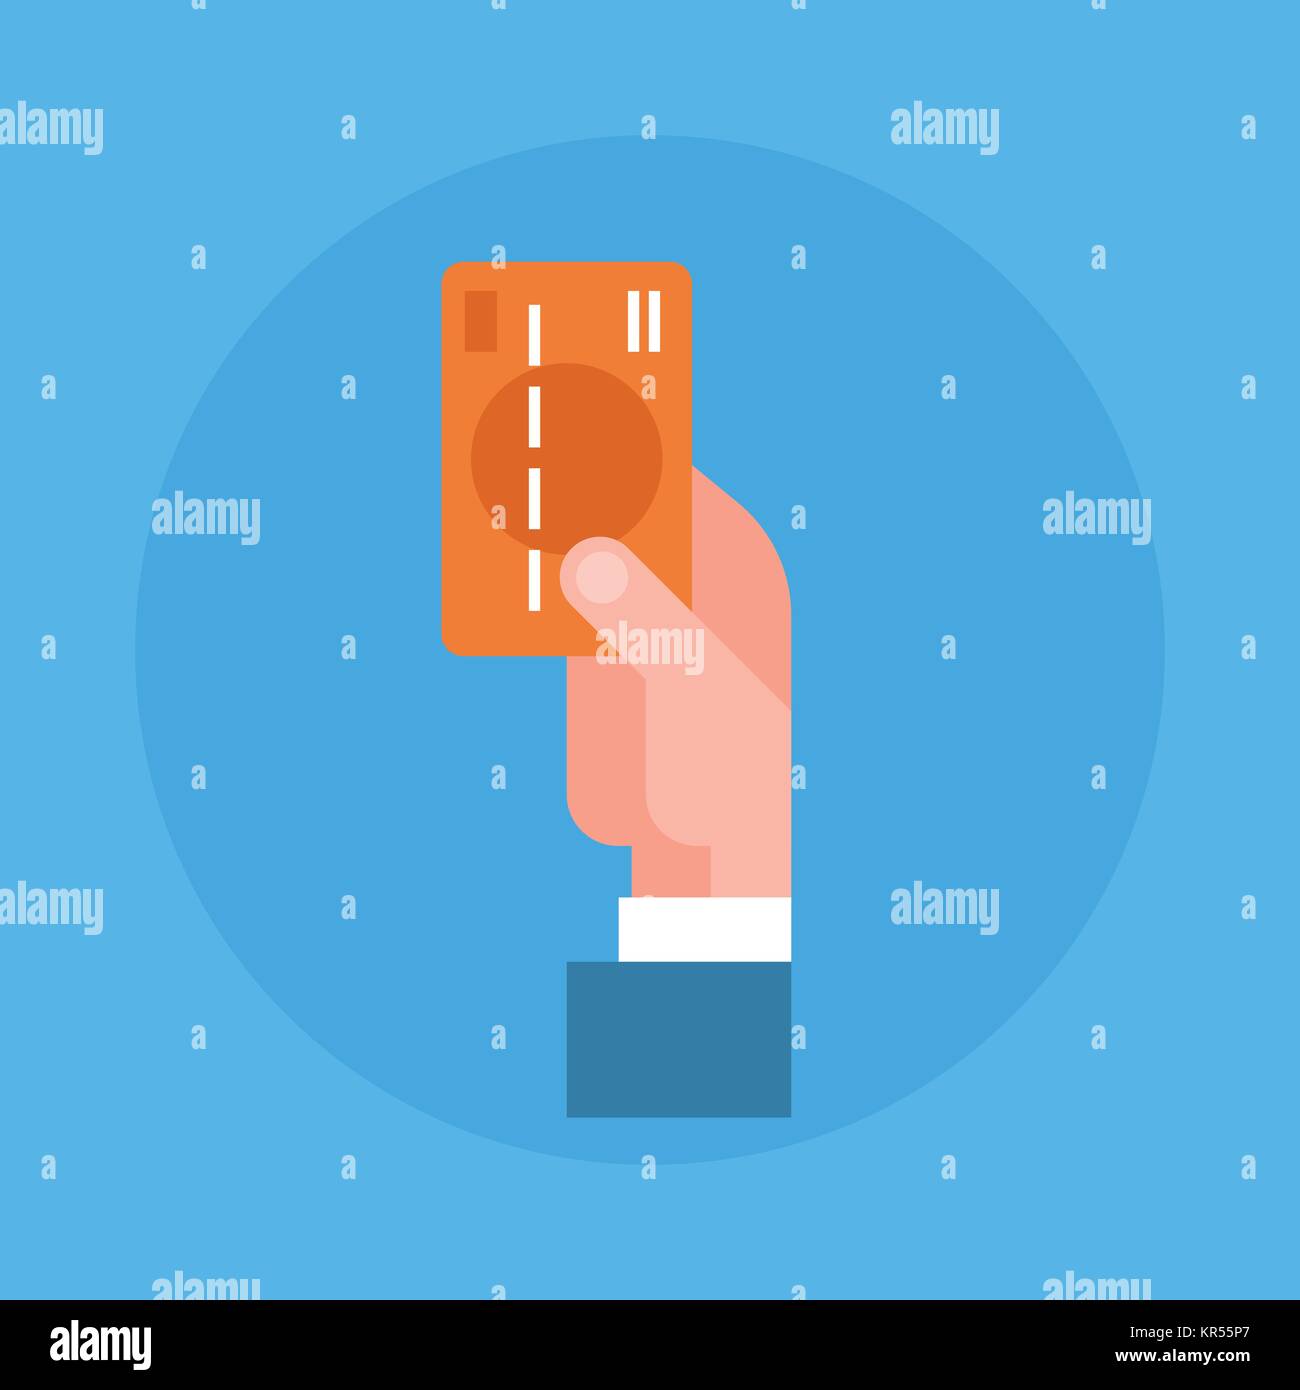 Business Man Hand Holding Credit Card Icon Stock Vector